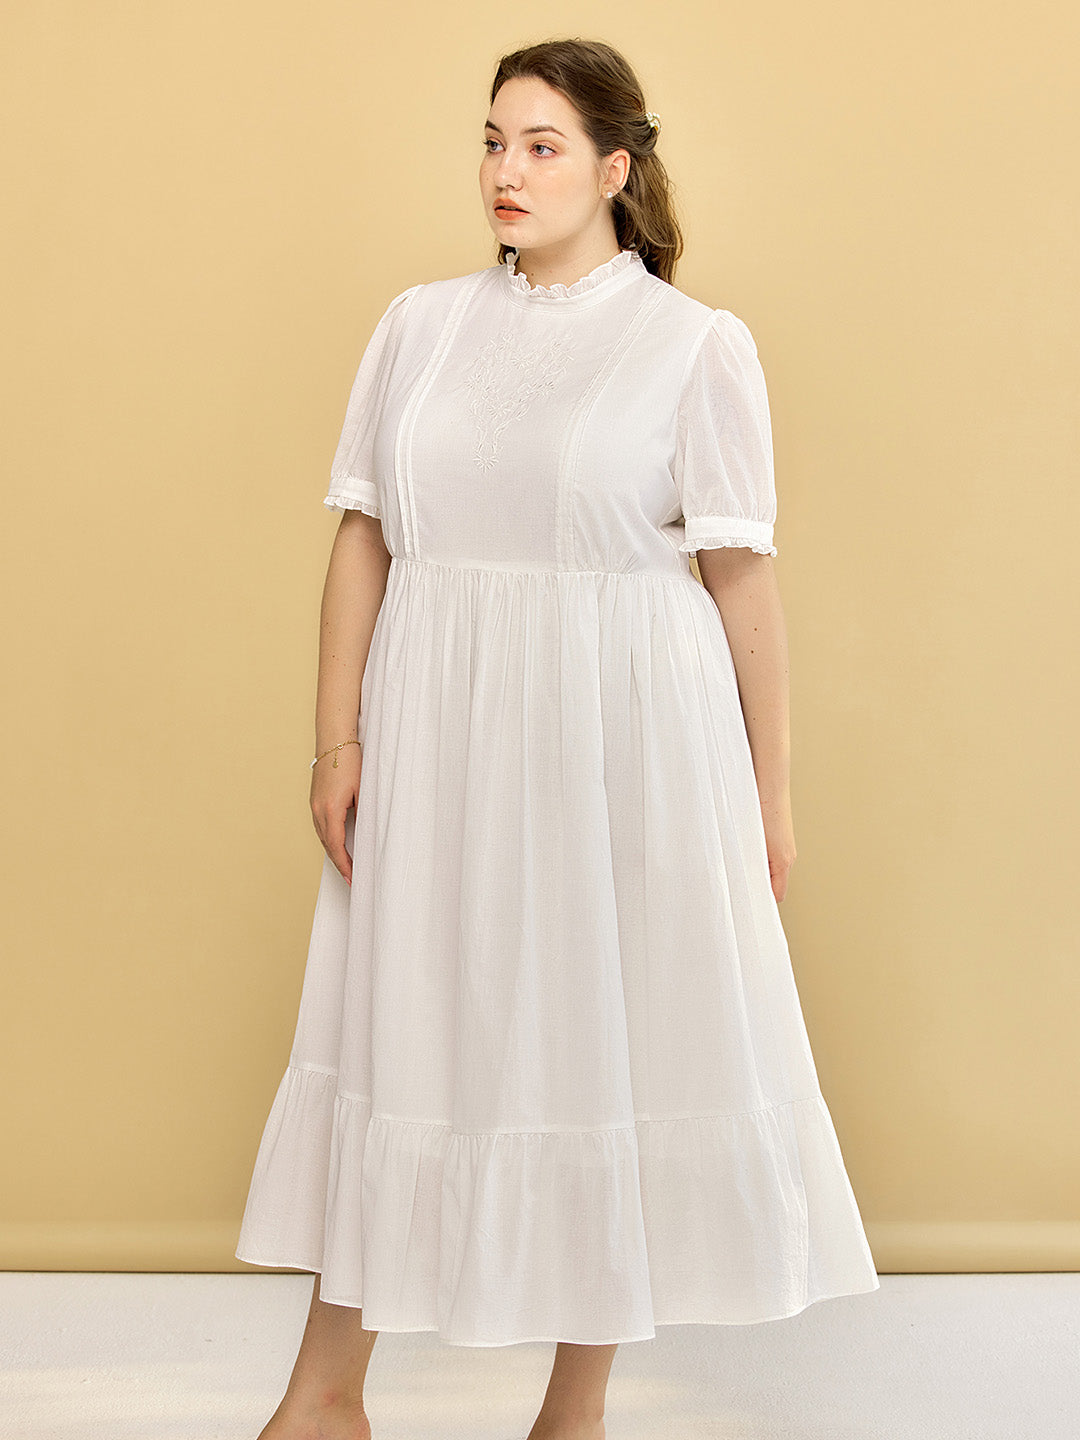 【Final Sale】Plus Size Afra White Stand-up Collar Bubble Sleeve Dress